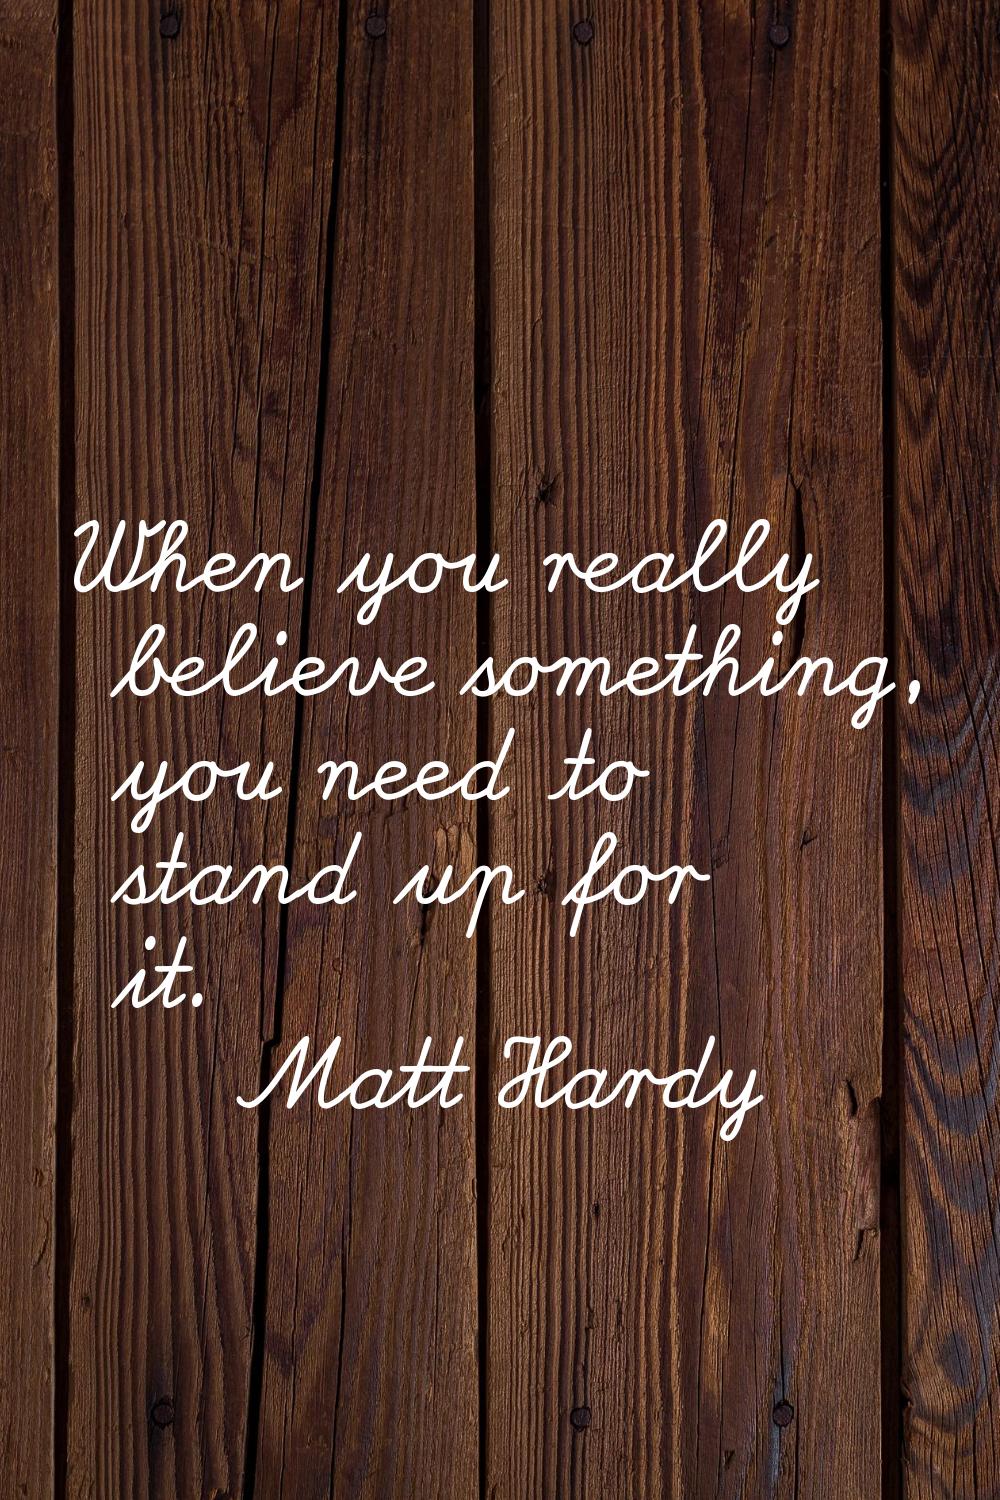 When you really believe something, you need to stand up for it.